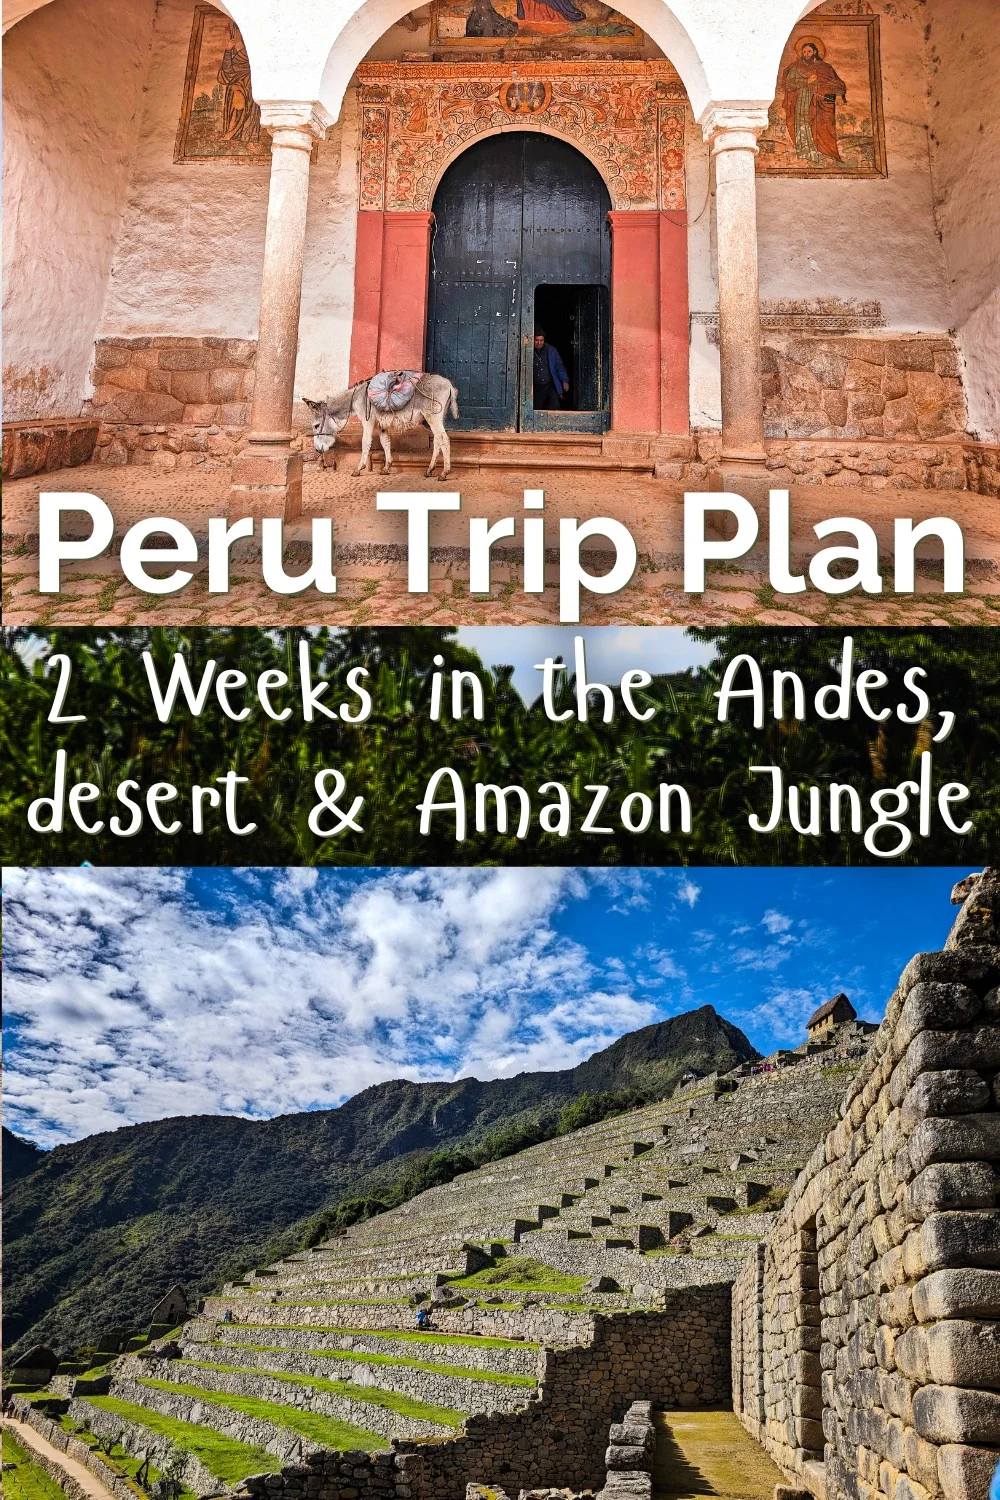 This two week Peru itinerary is perfect for an adventurous family or a solo traveler for their first time visiting Peru. From Machu Picchu to the Amazon rainforest, this Peru trip plan is affordable, fun and unforgettable.